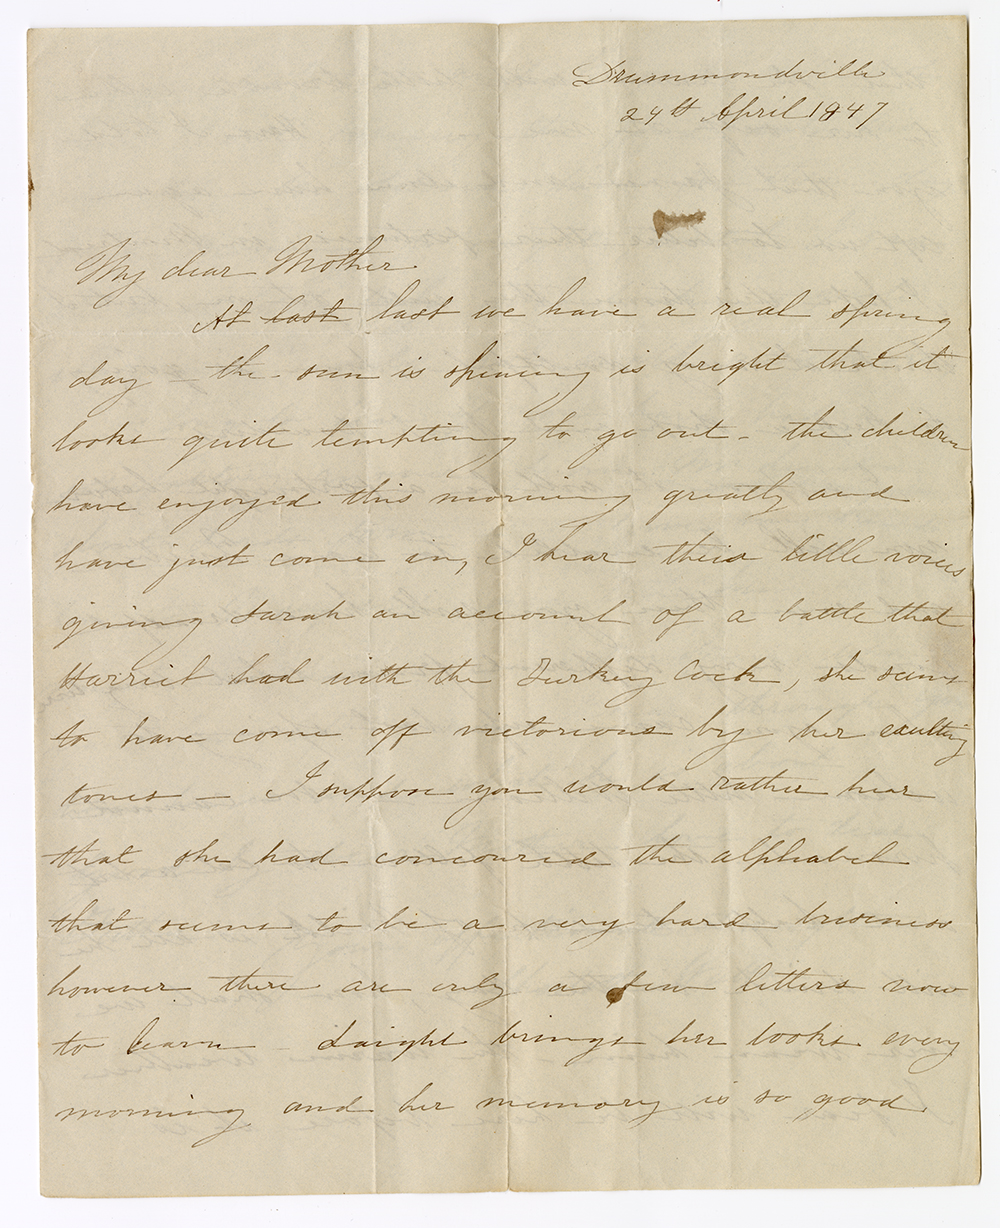 Yellowed handwritten letter from Charlotte Watts from Drummondville, April 24, 1847.